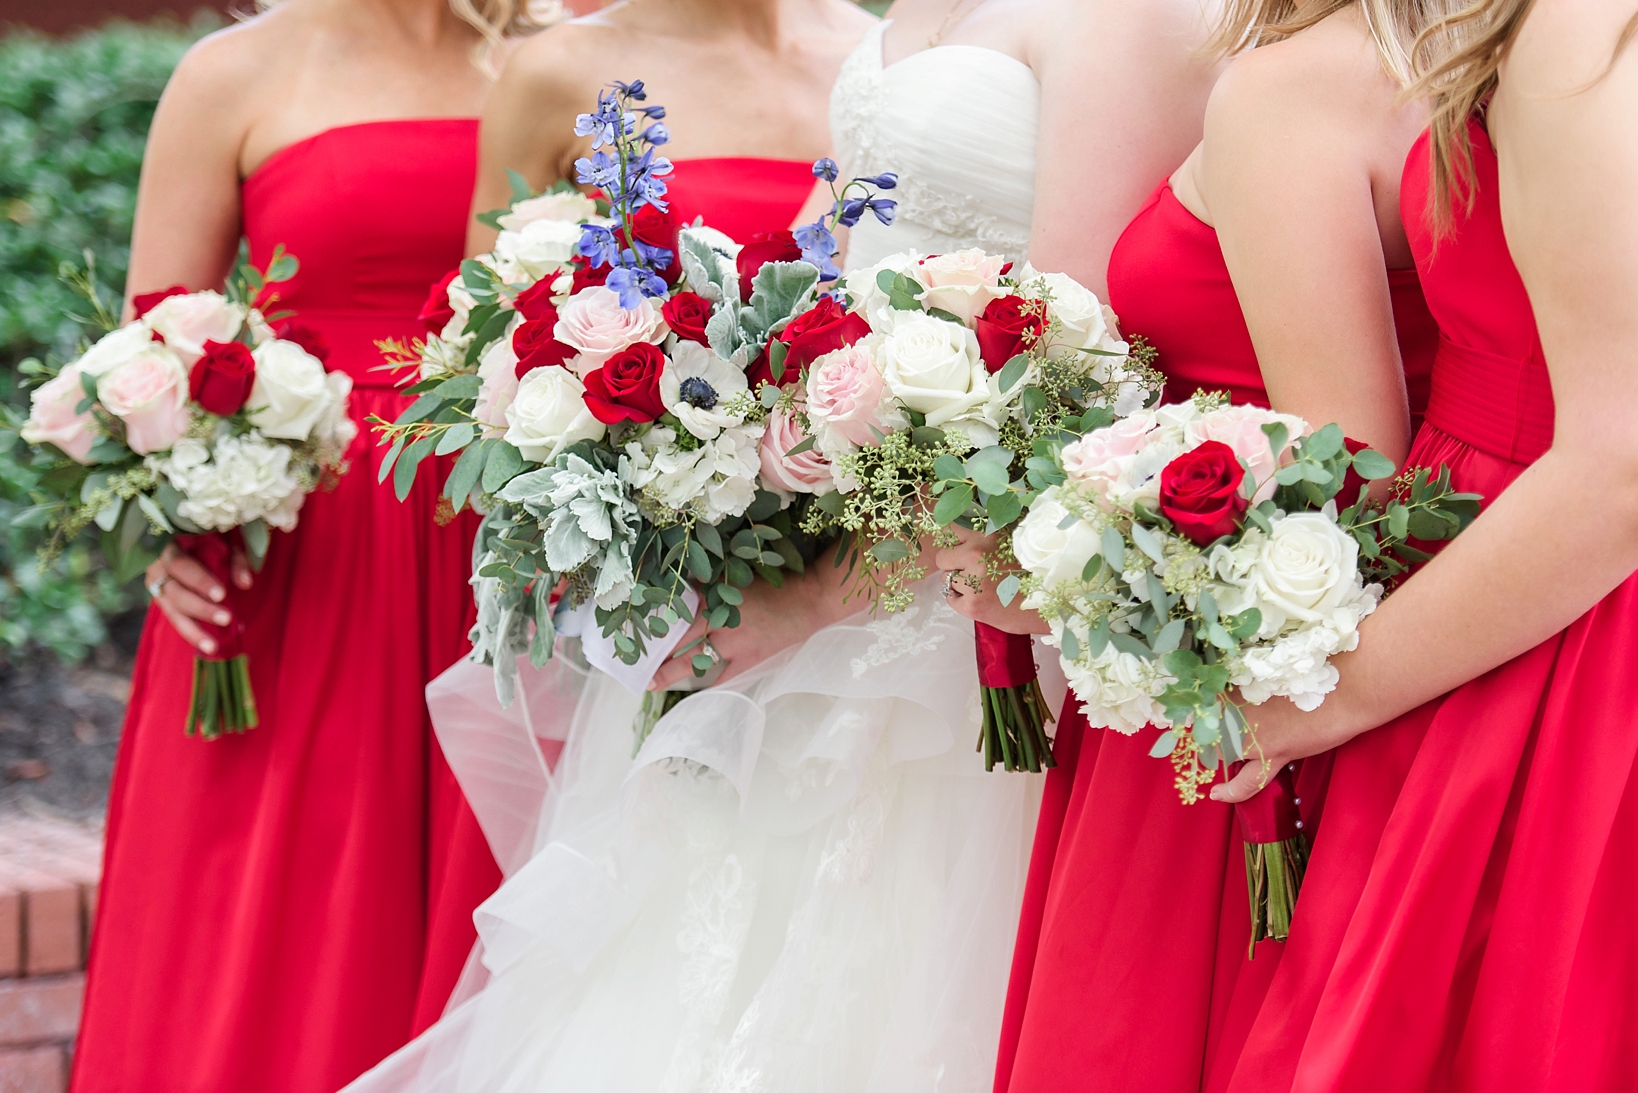 Floral details of the bride and her bridesmaids bouquets popping against the red dresses